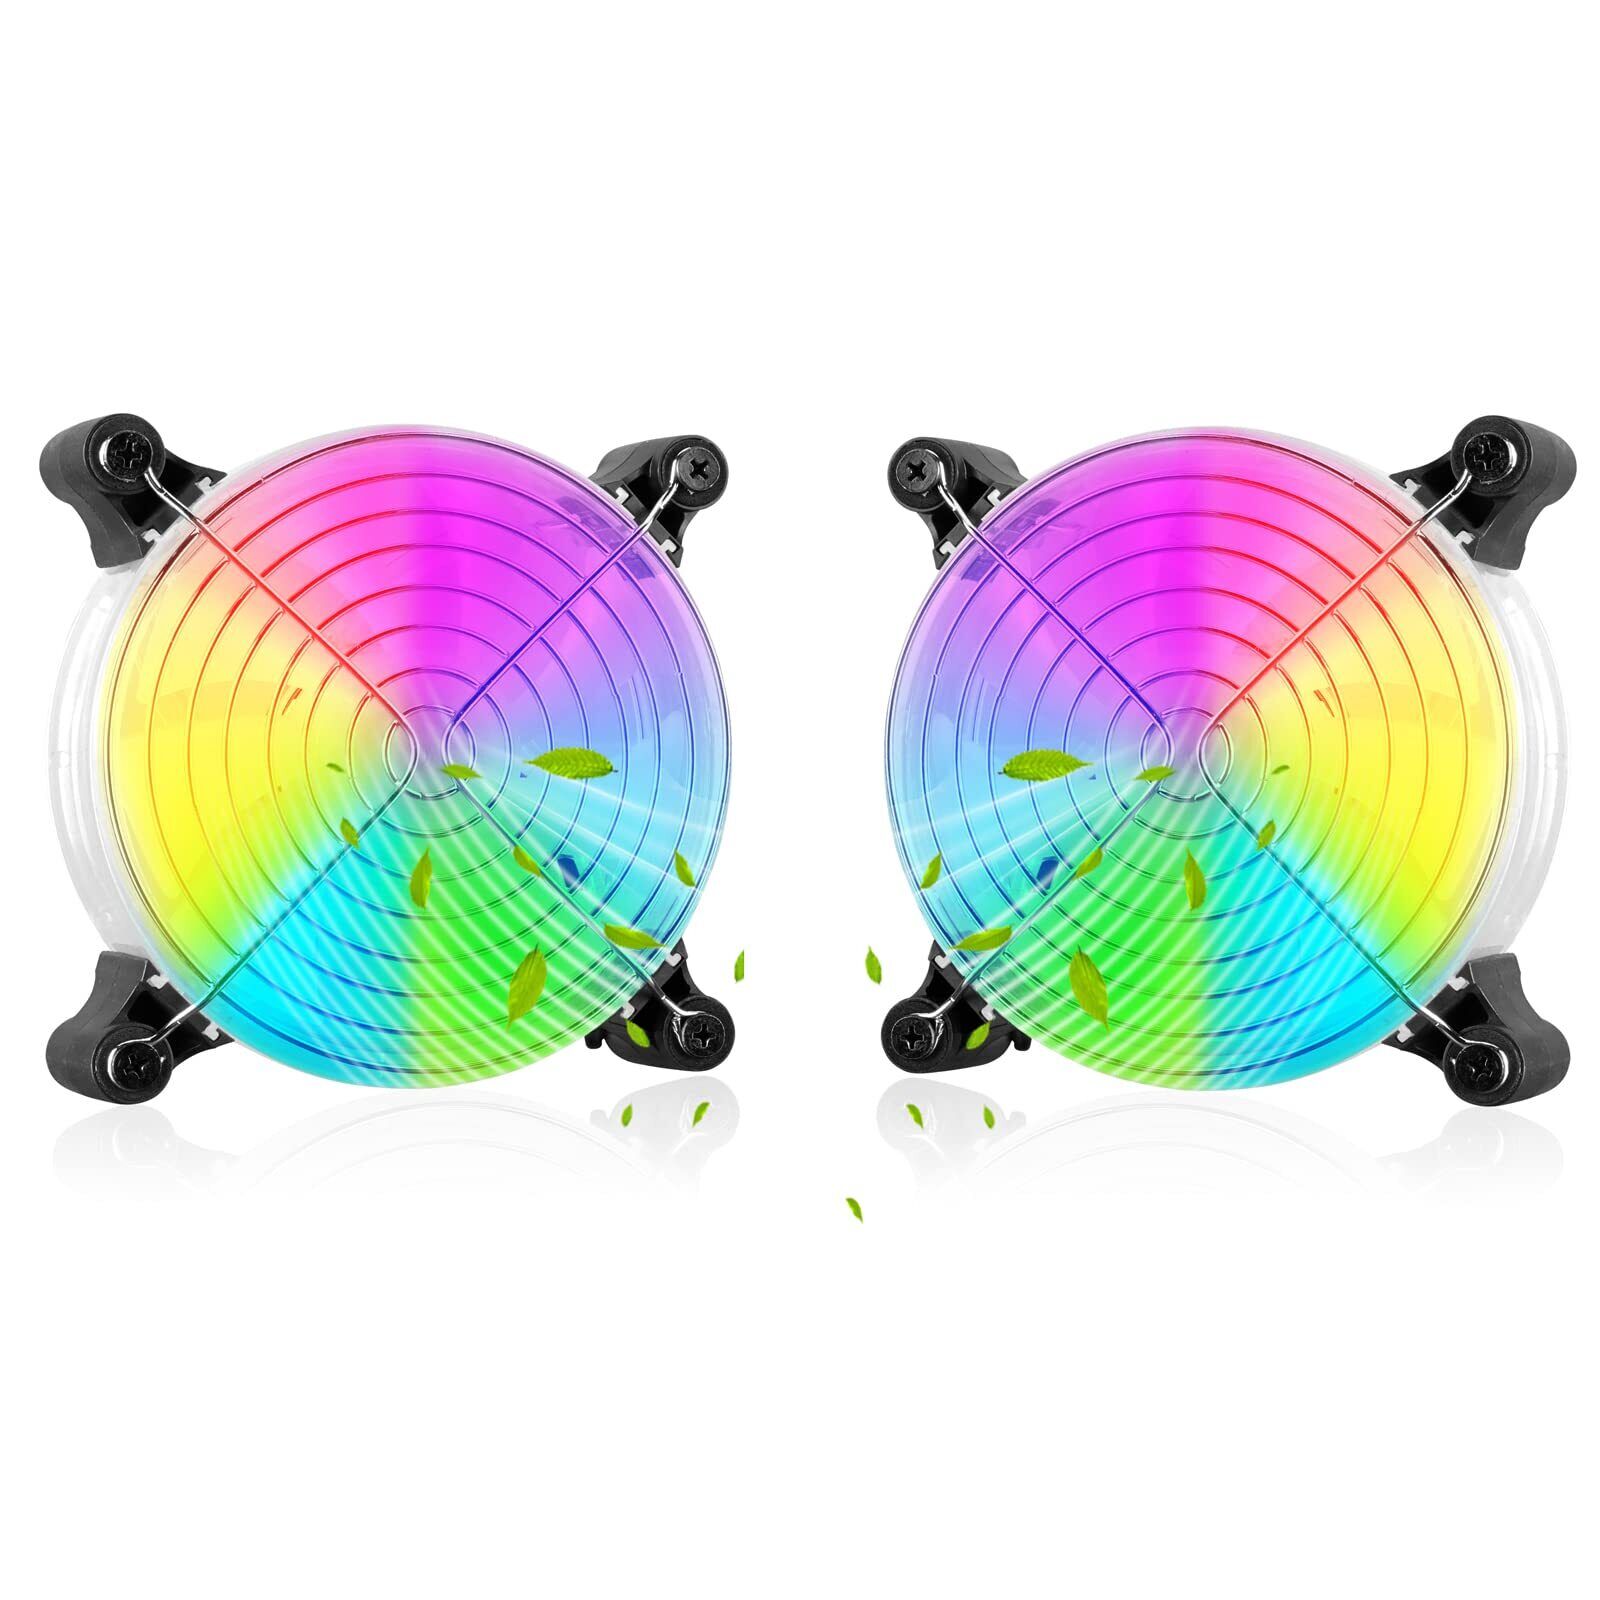 2-Pack USB Computer Cooling Fan 5v 120mm Small Transparent Quiet led RGB Colo...